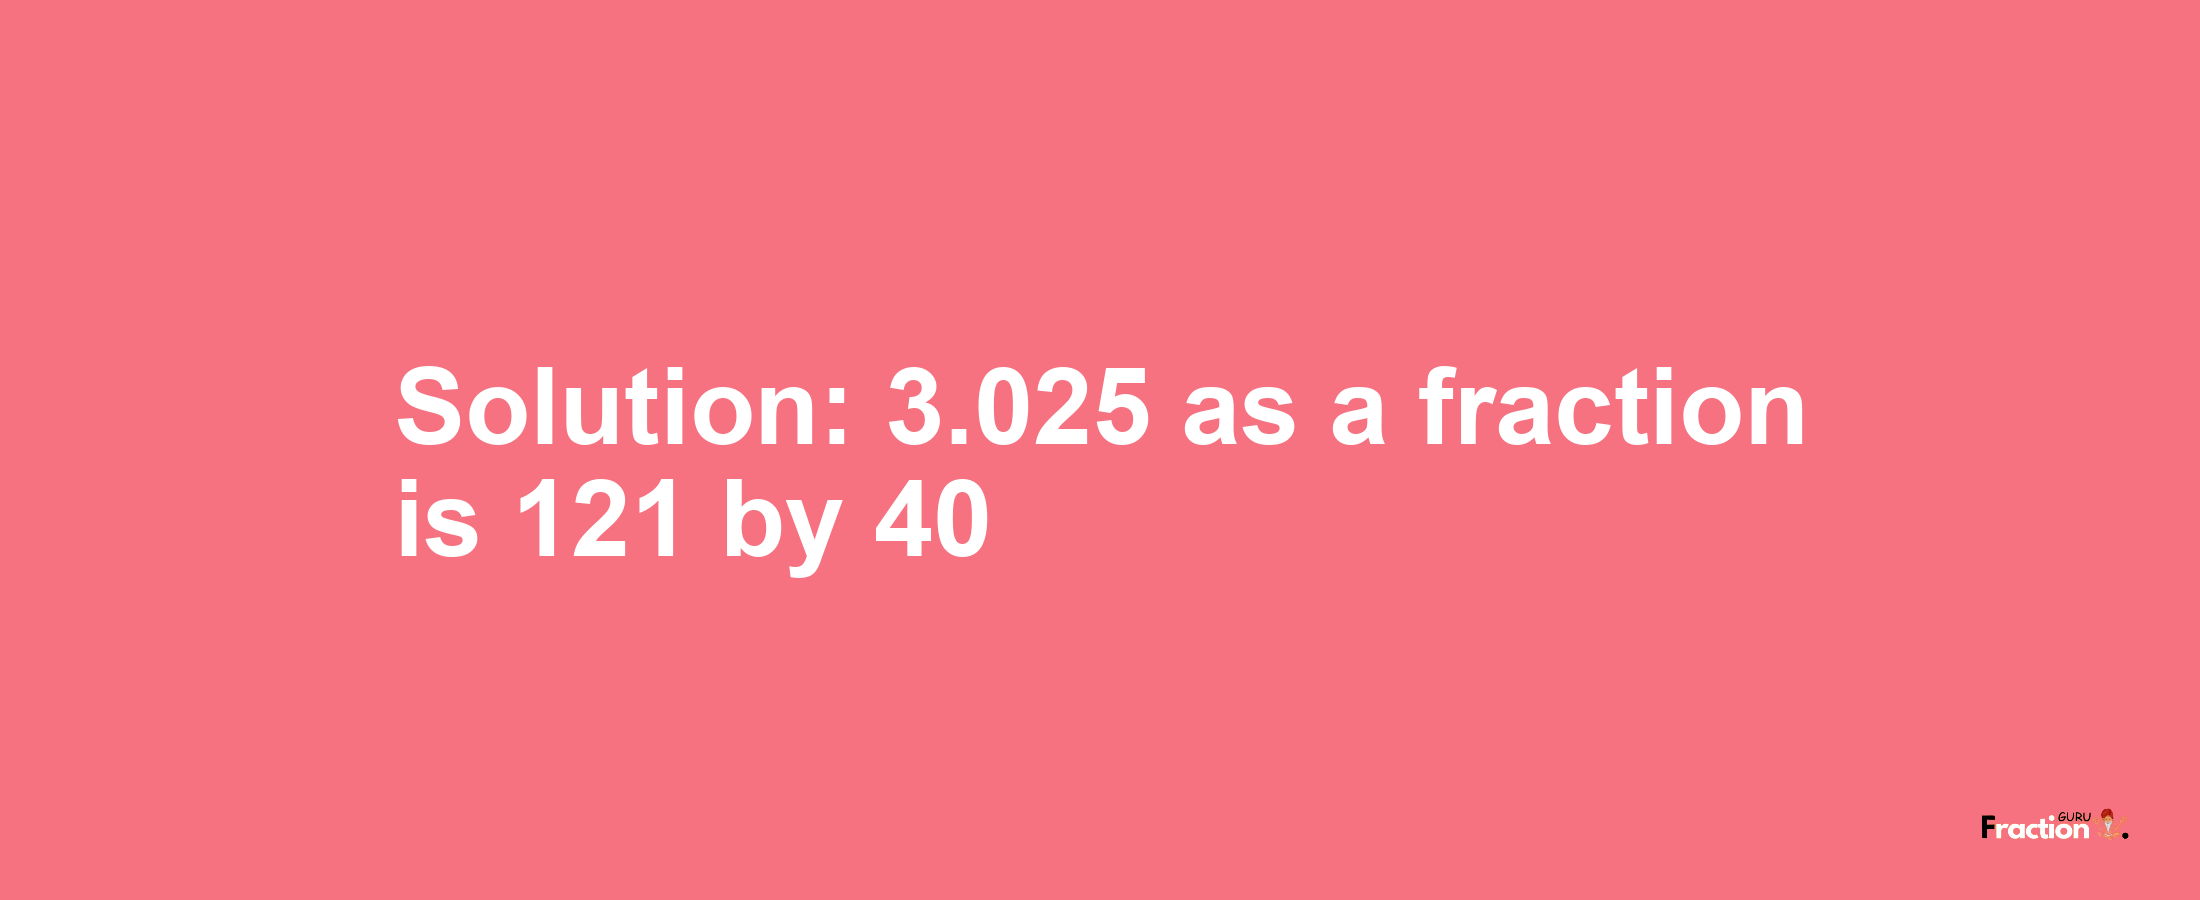 Solution:3.025 as a fraction is 121/40